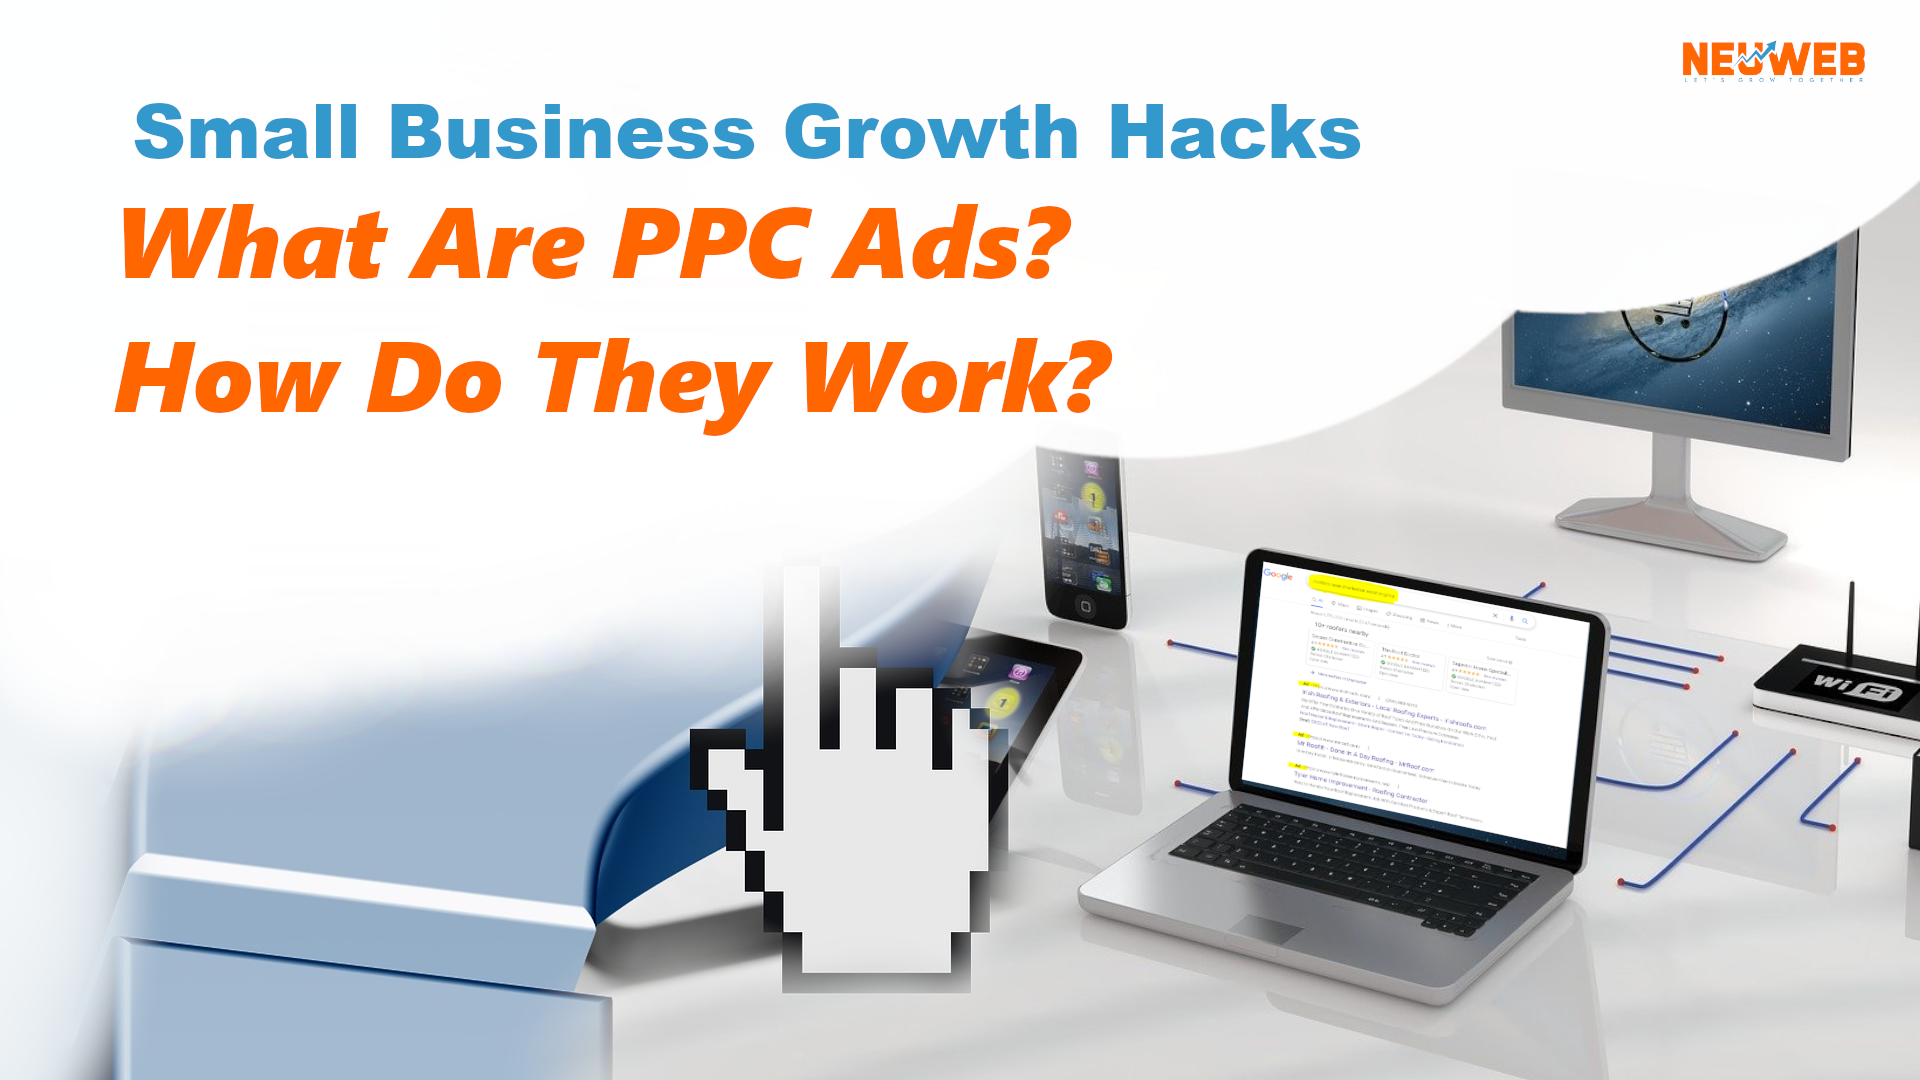 What are PPC ads, and how do they work?